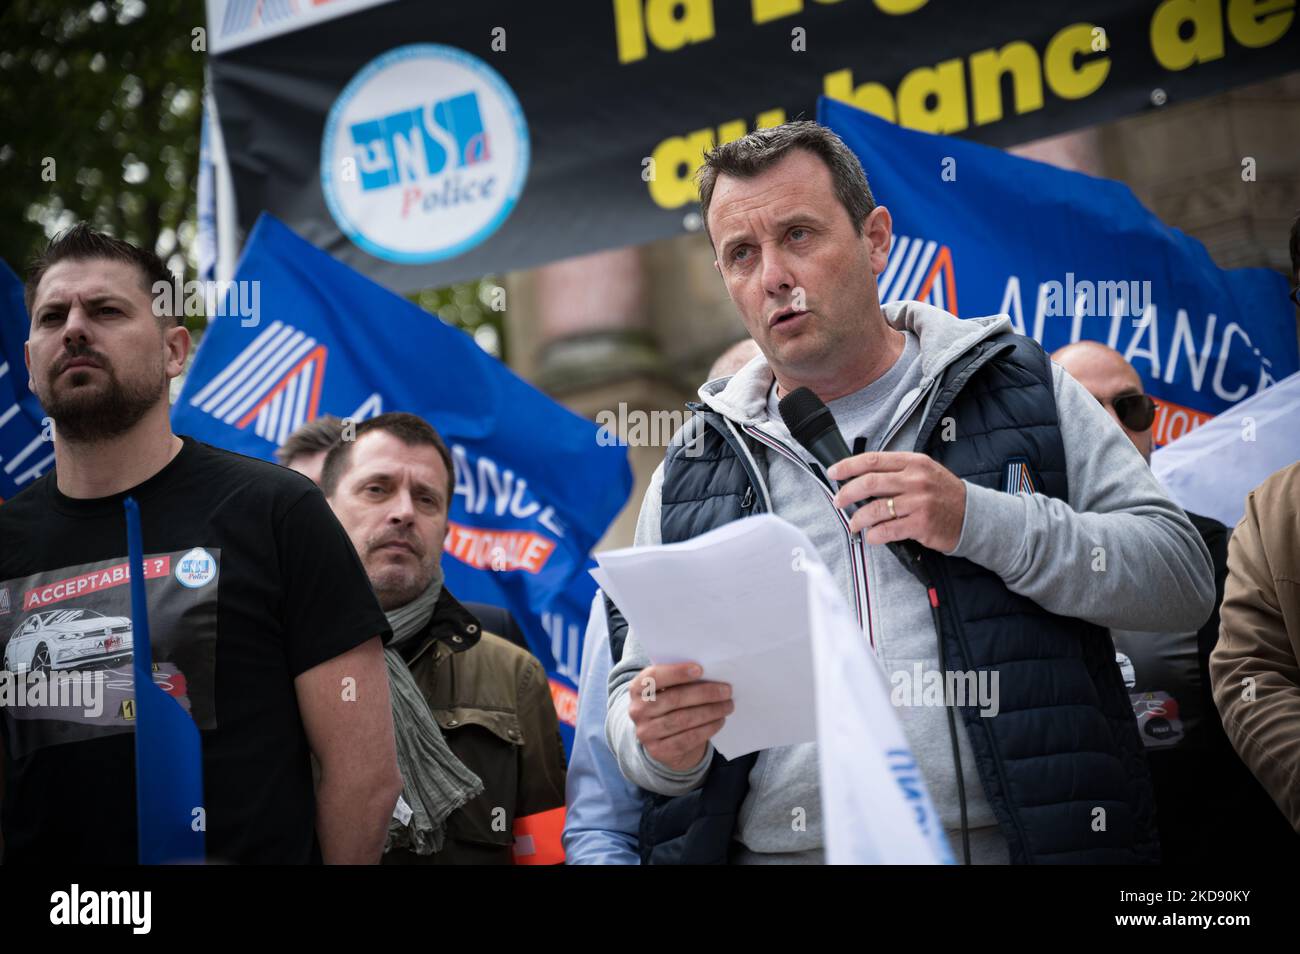 Fabien Vanhemelryck, secretary general of the Alliance Police Nationale union, speaks at a police demonstration in Paris on May 2, 2022 to protest against the indictment for "voluntary manslaughter" of the French police officer who killed two men who allegedly forced a checkpoint on the Pont-Neuf in Paris on April 24, 2022. The call for the rally was initiated by the Alliance Police Nationale union, which was joined by the Synergie officers' union and Unsa-Police. (Photo by Samuel Boivin/NurPhoto) Stock Photo